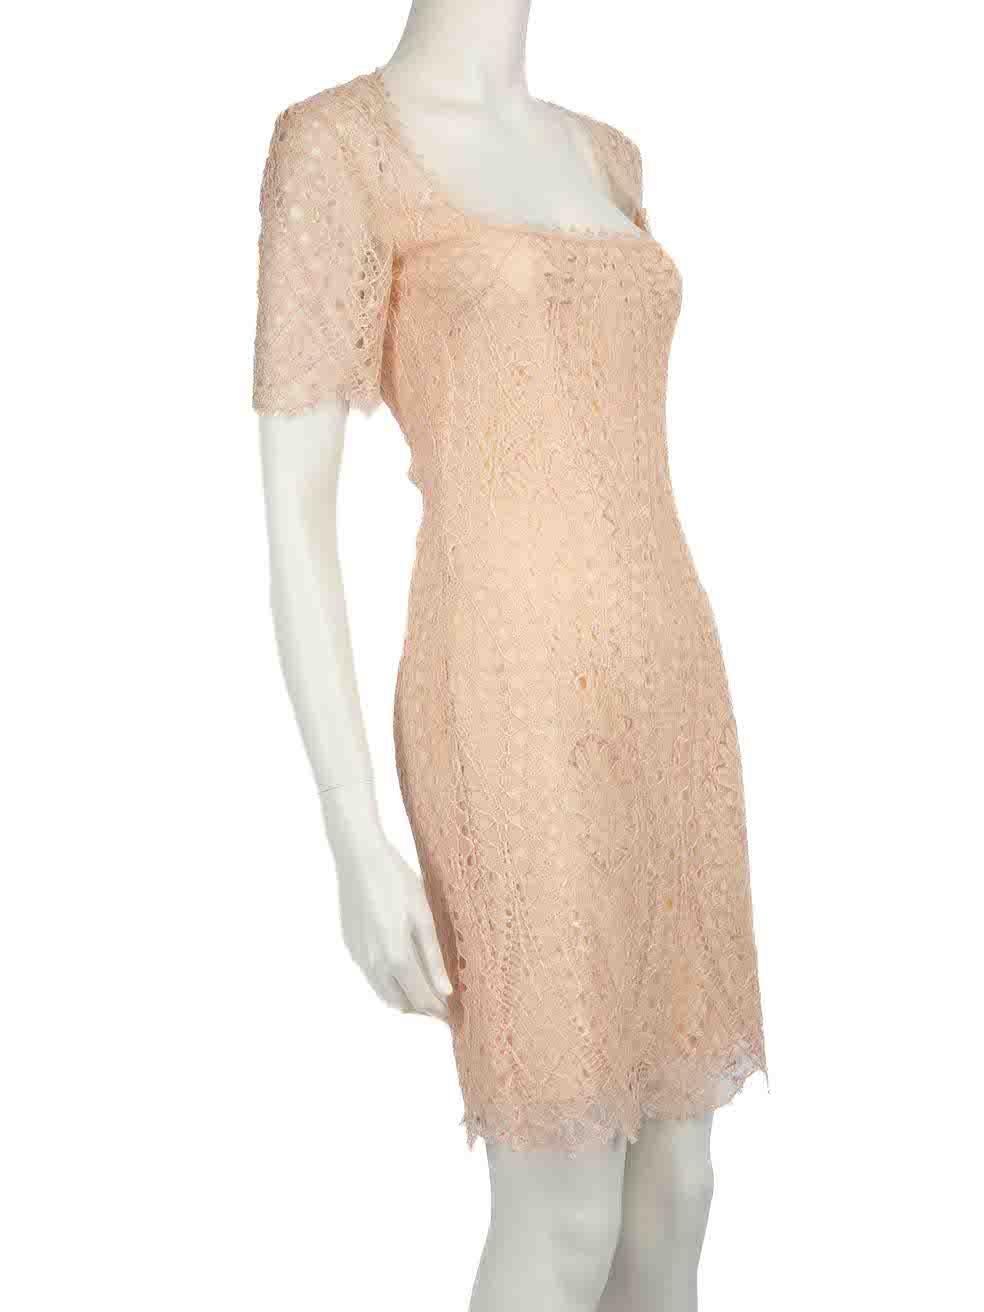 CONDITION is Very good. Minimal wear to dress is evident. Minimal wear to the front and back with plucks to the lace on this used Emilio Pucci designer resale item.
 
 
 
 Details
 
 
 Pink
 
 Lace
 
 Mini dress
 
 Round neckline
 
 Sheer on